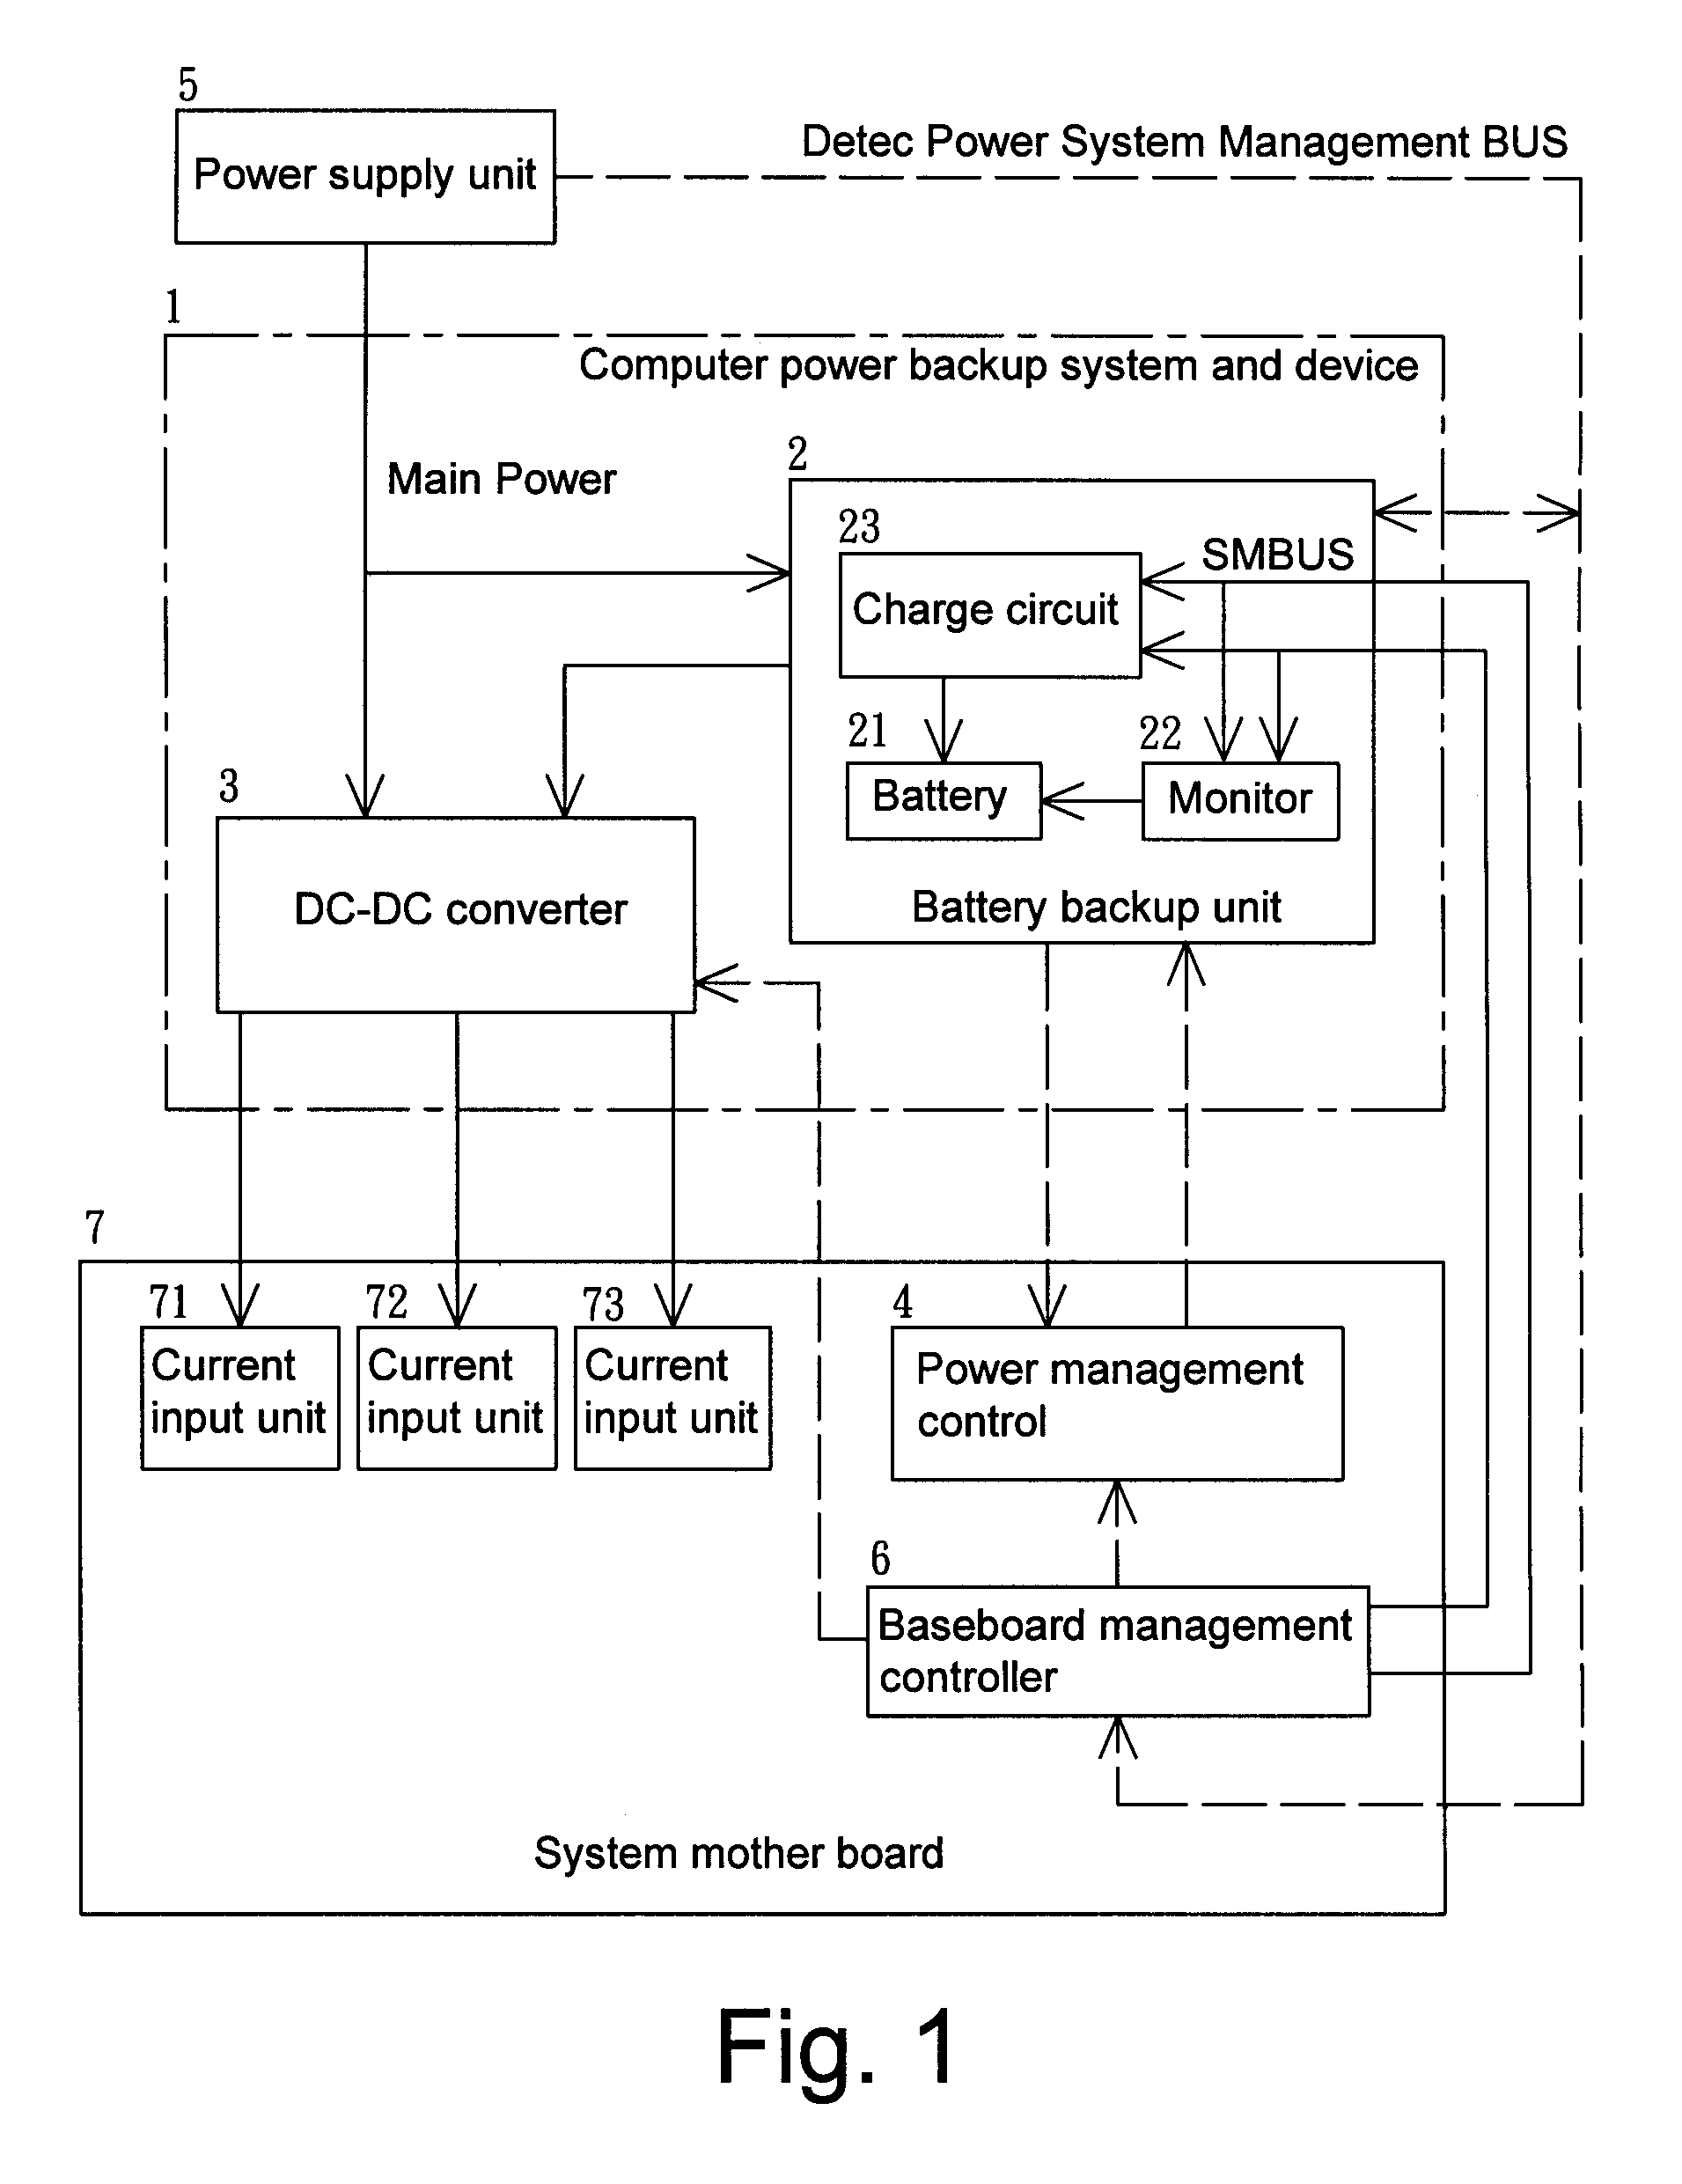 Computer power backup system and device